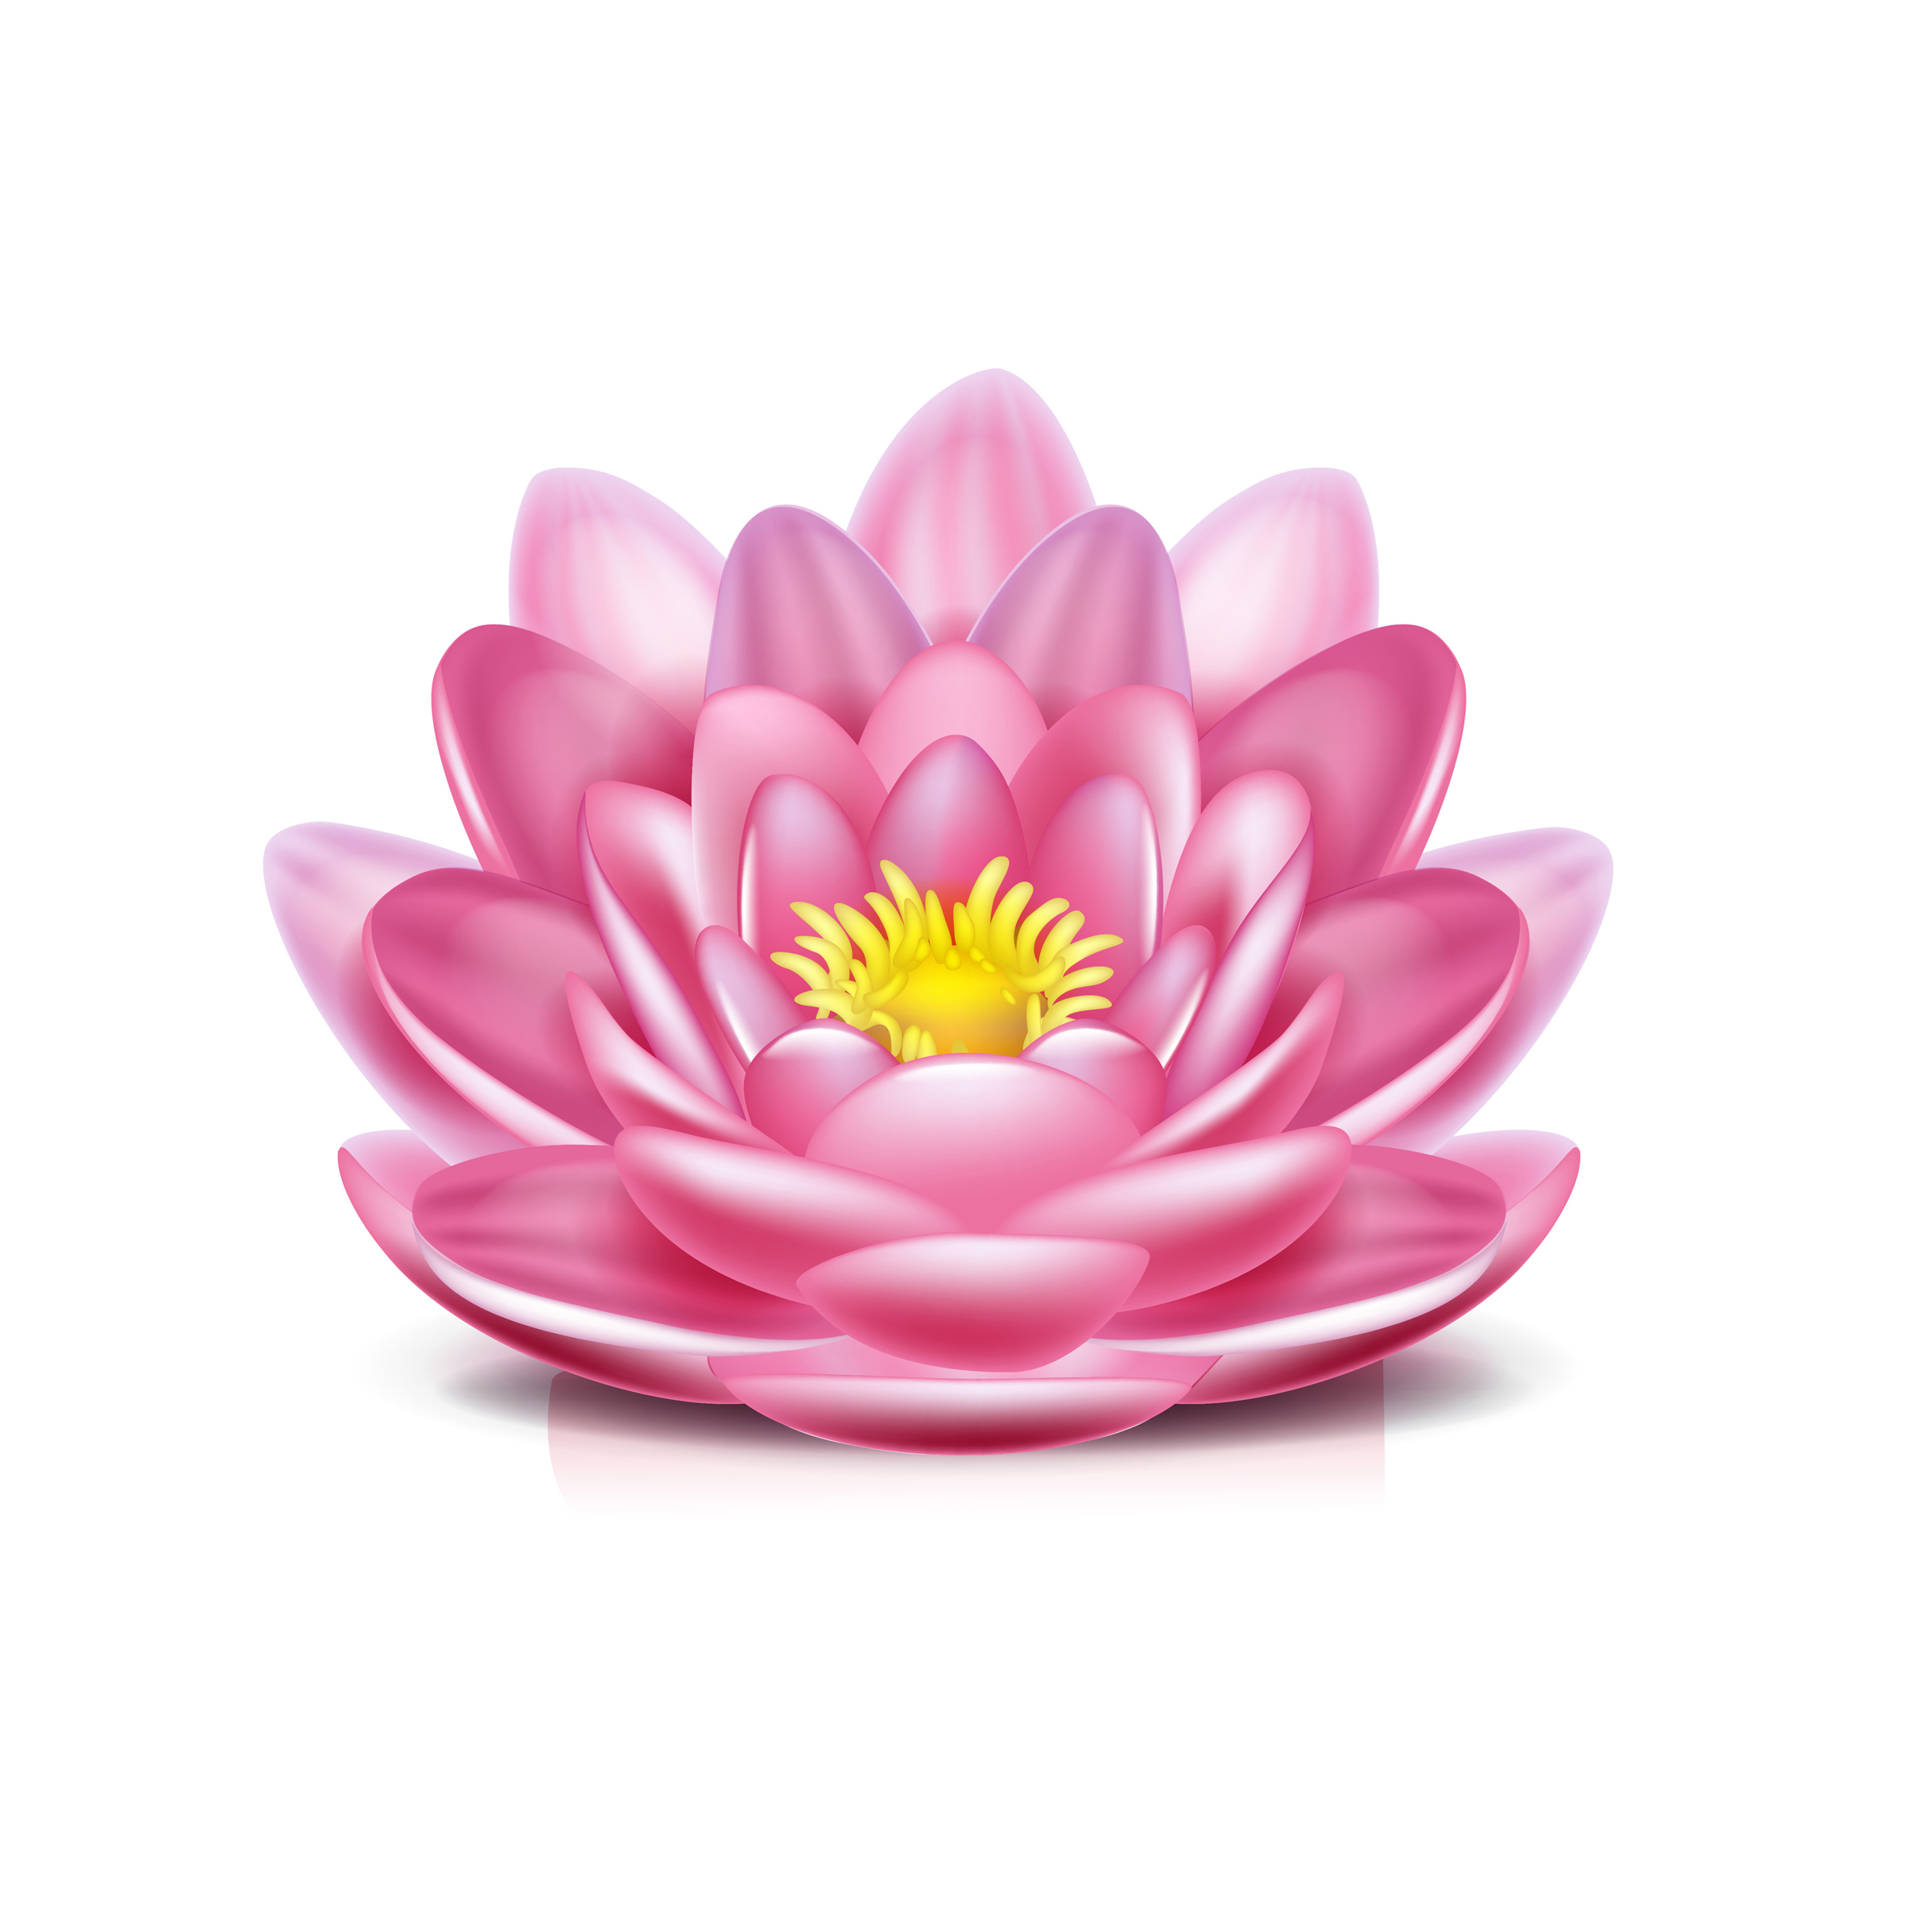 Lotus Flower Isolated On White - Lotus Flower, Transparent background PNG HD thumbnail